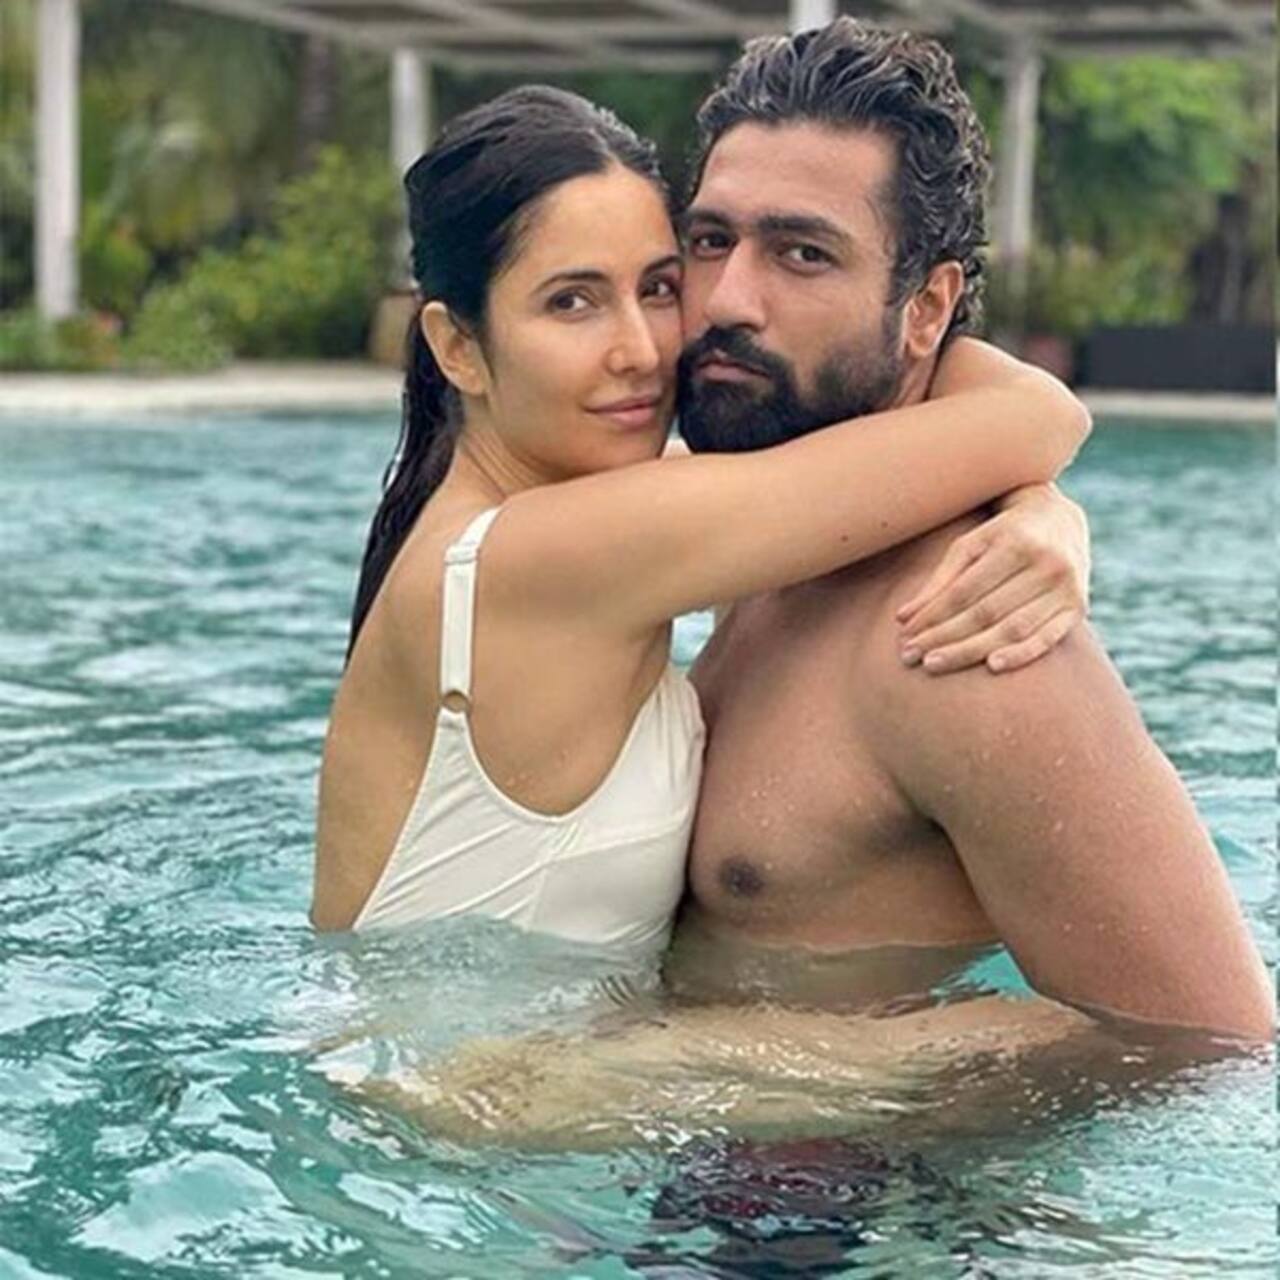 Amid Katrina Kaif-Vicky Kaushal pregnancy rumours, astrologer predicts Tiger 3 actress will take 2 years sabbatical to focus on her baby